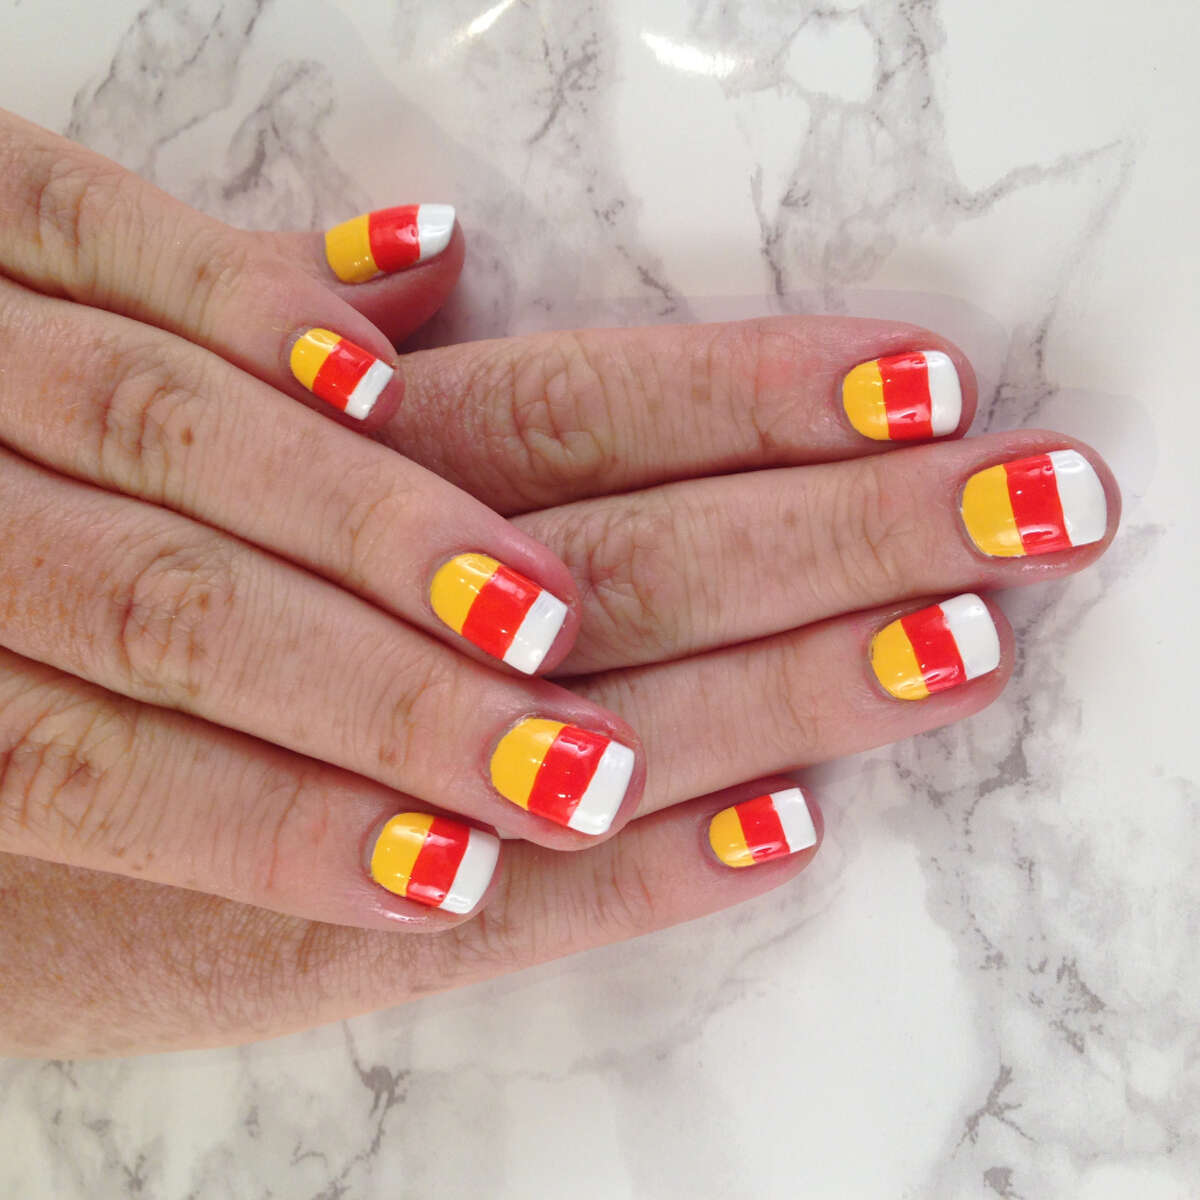 Candy corn-inspired Halloween nail art by TopCoat nail artist Taylor Watson of SF Party Nails: White Matter by Formula X Nail Polish, Monarch by RGB Cosmetics, Pimms by Butter London.